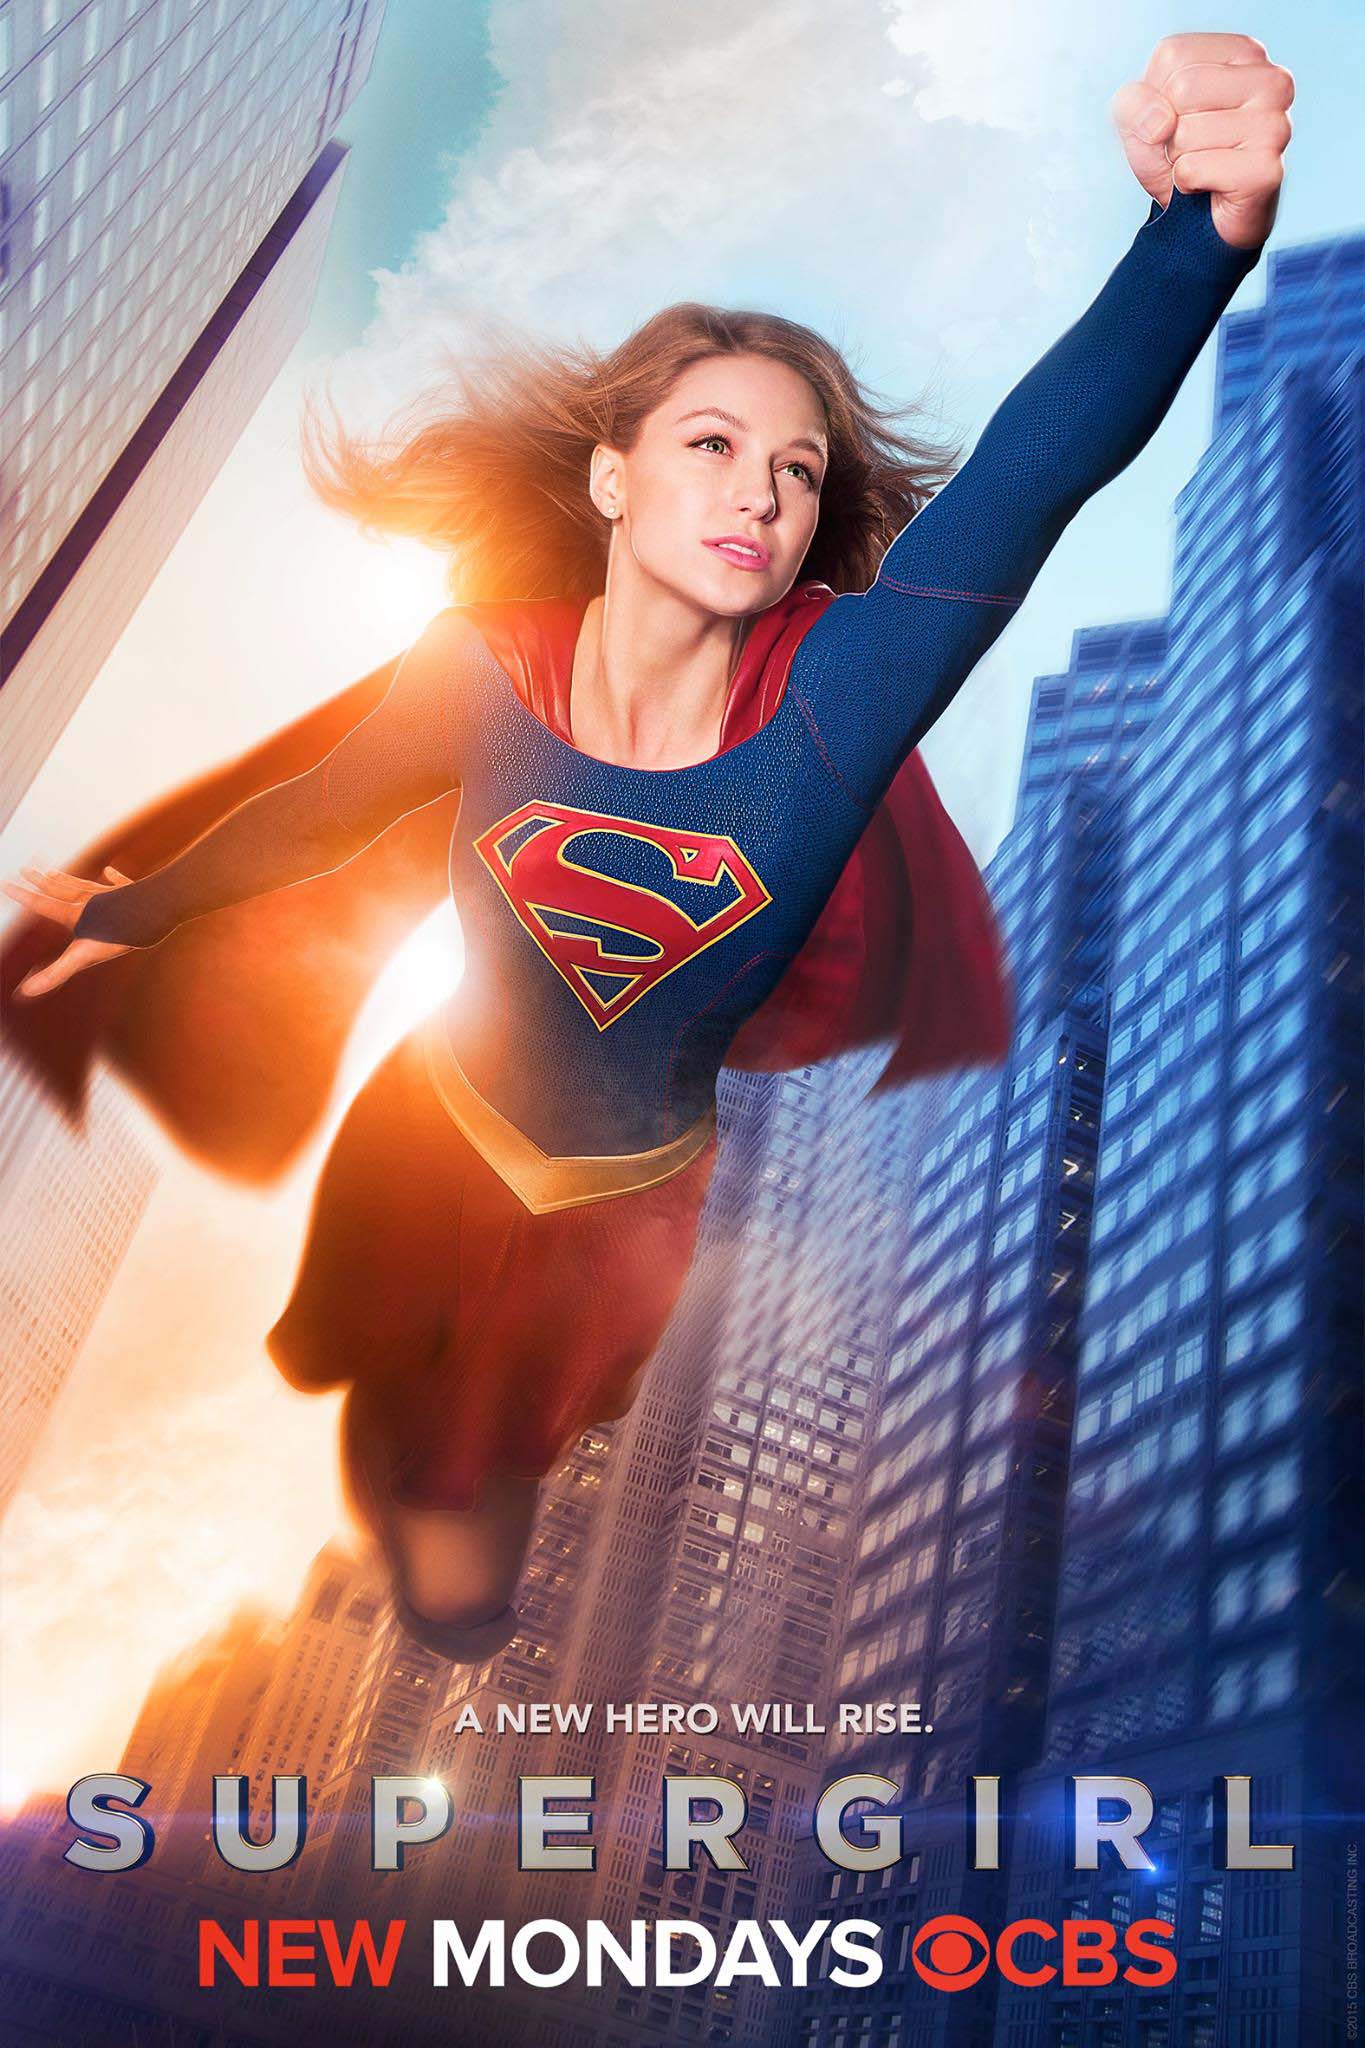 Supergirl(2015) The adventures of Superman's cousin in her own superhero career.